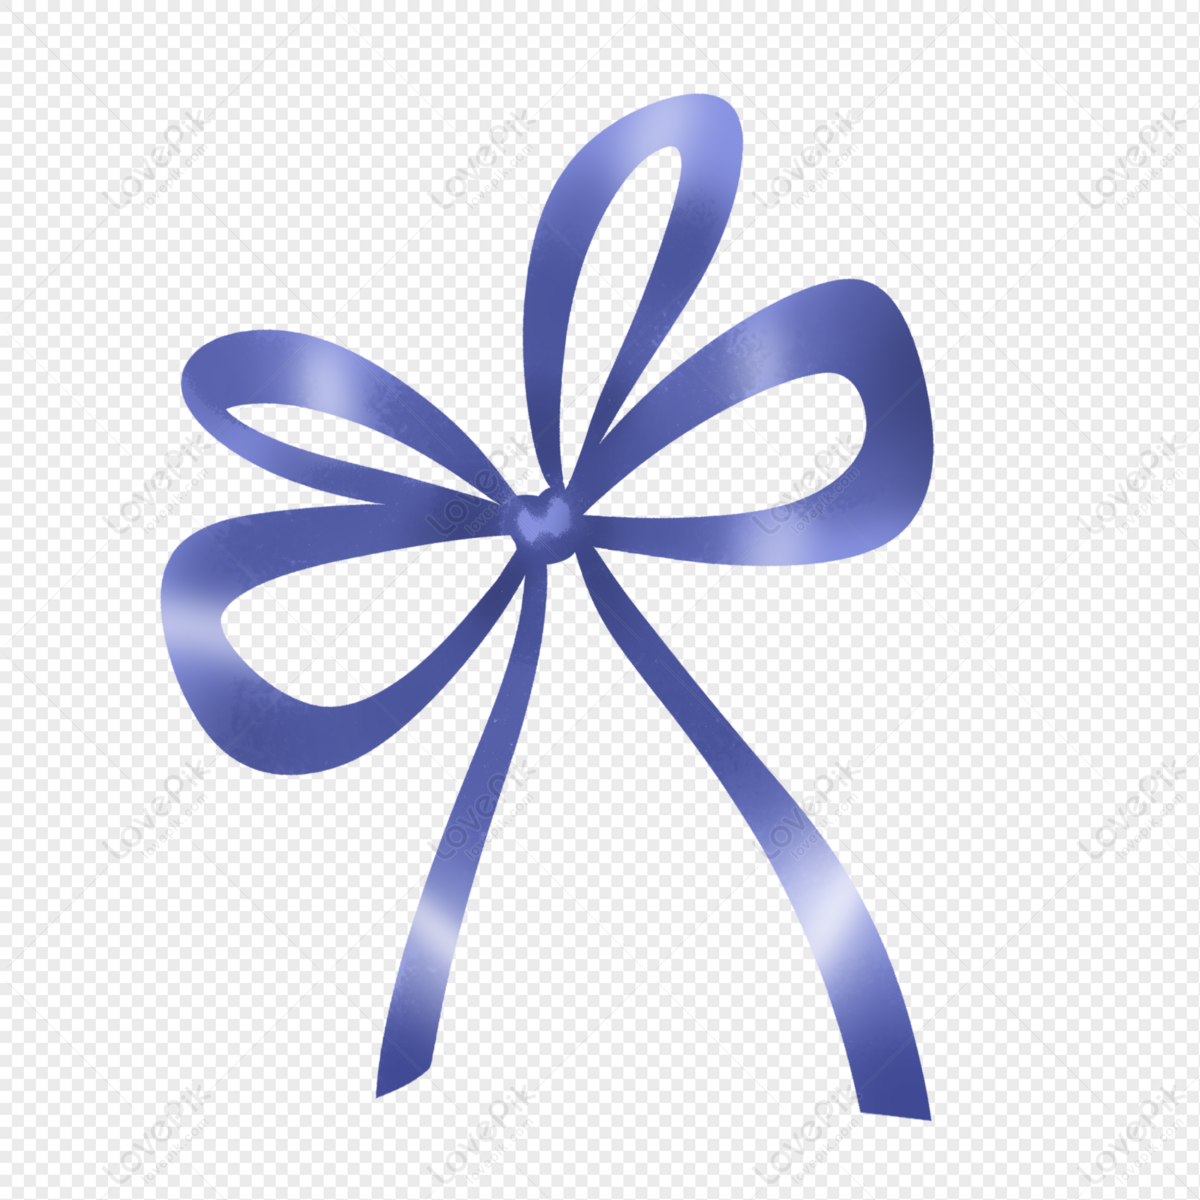 Blue Ribbon PNG Images, Download 4500+ Blue Ribbon PNG Resources